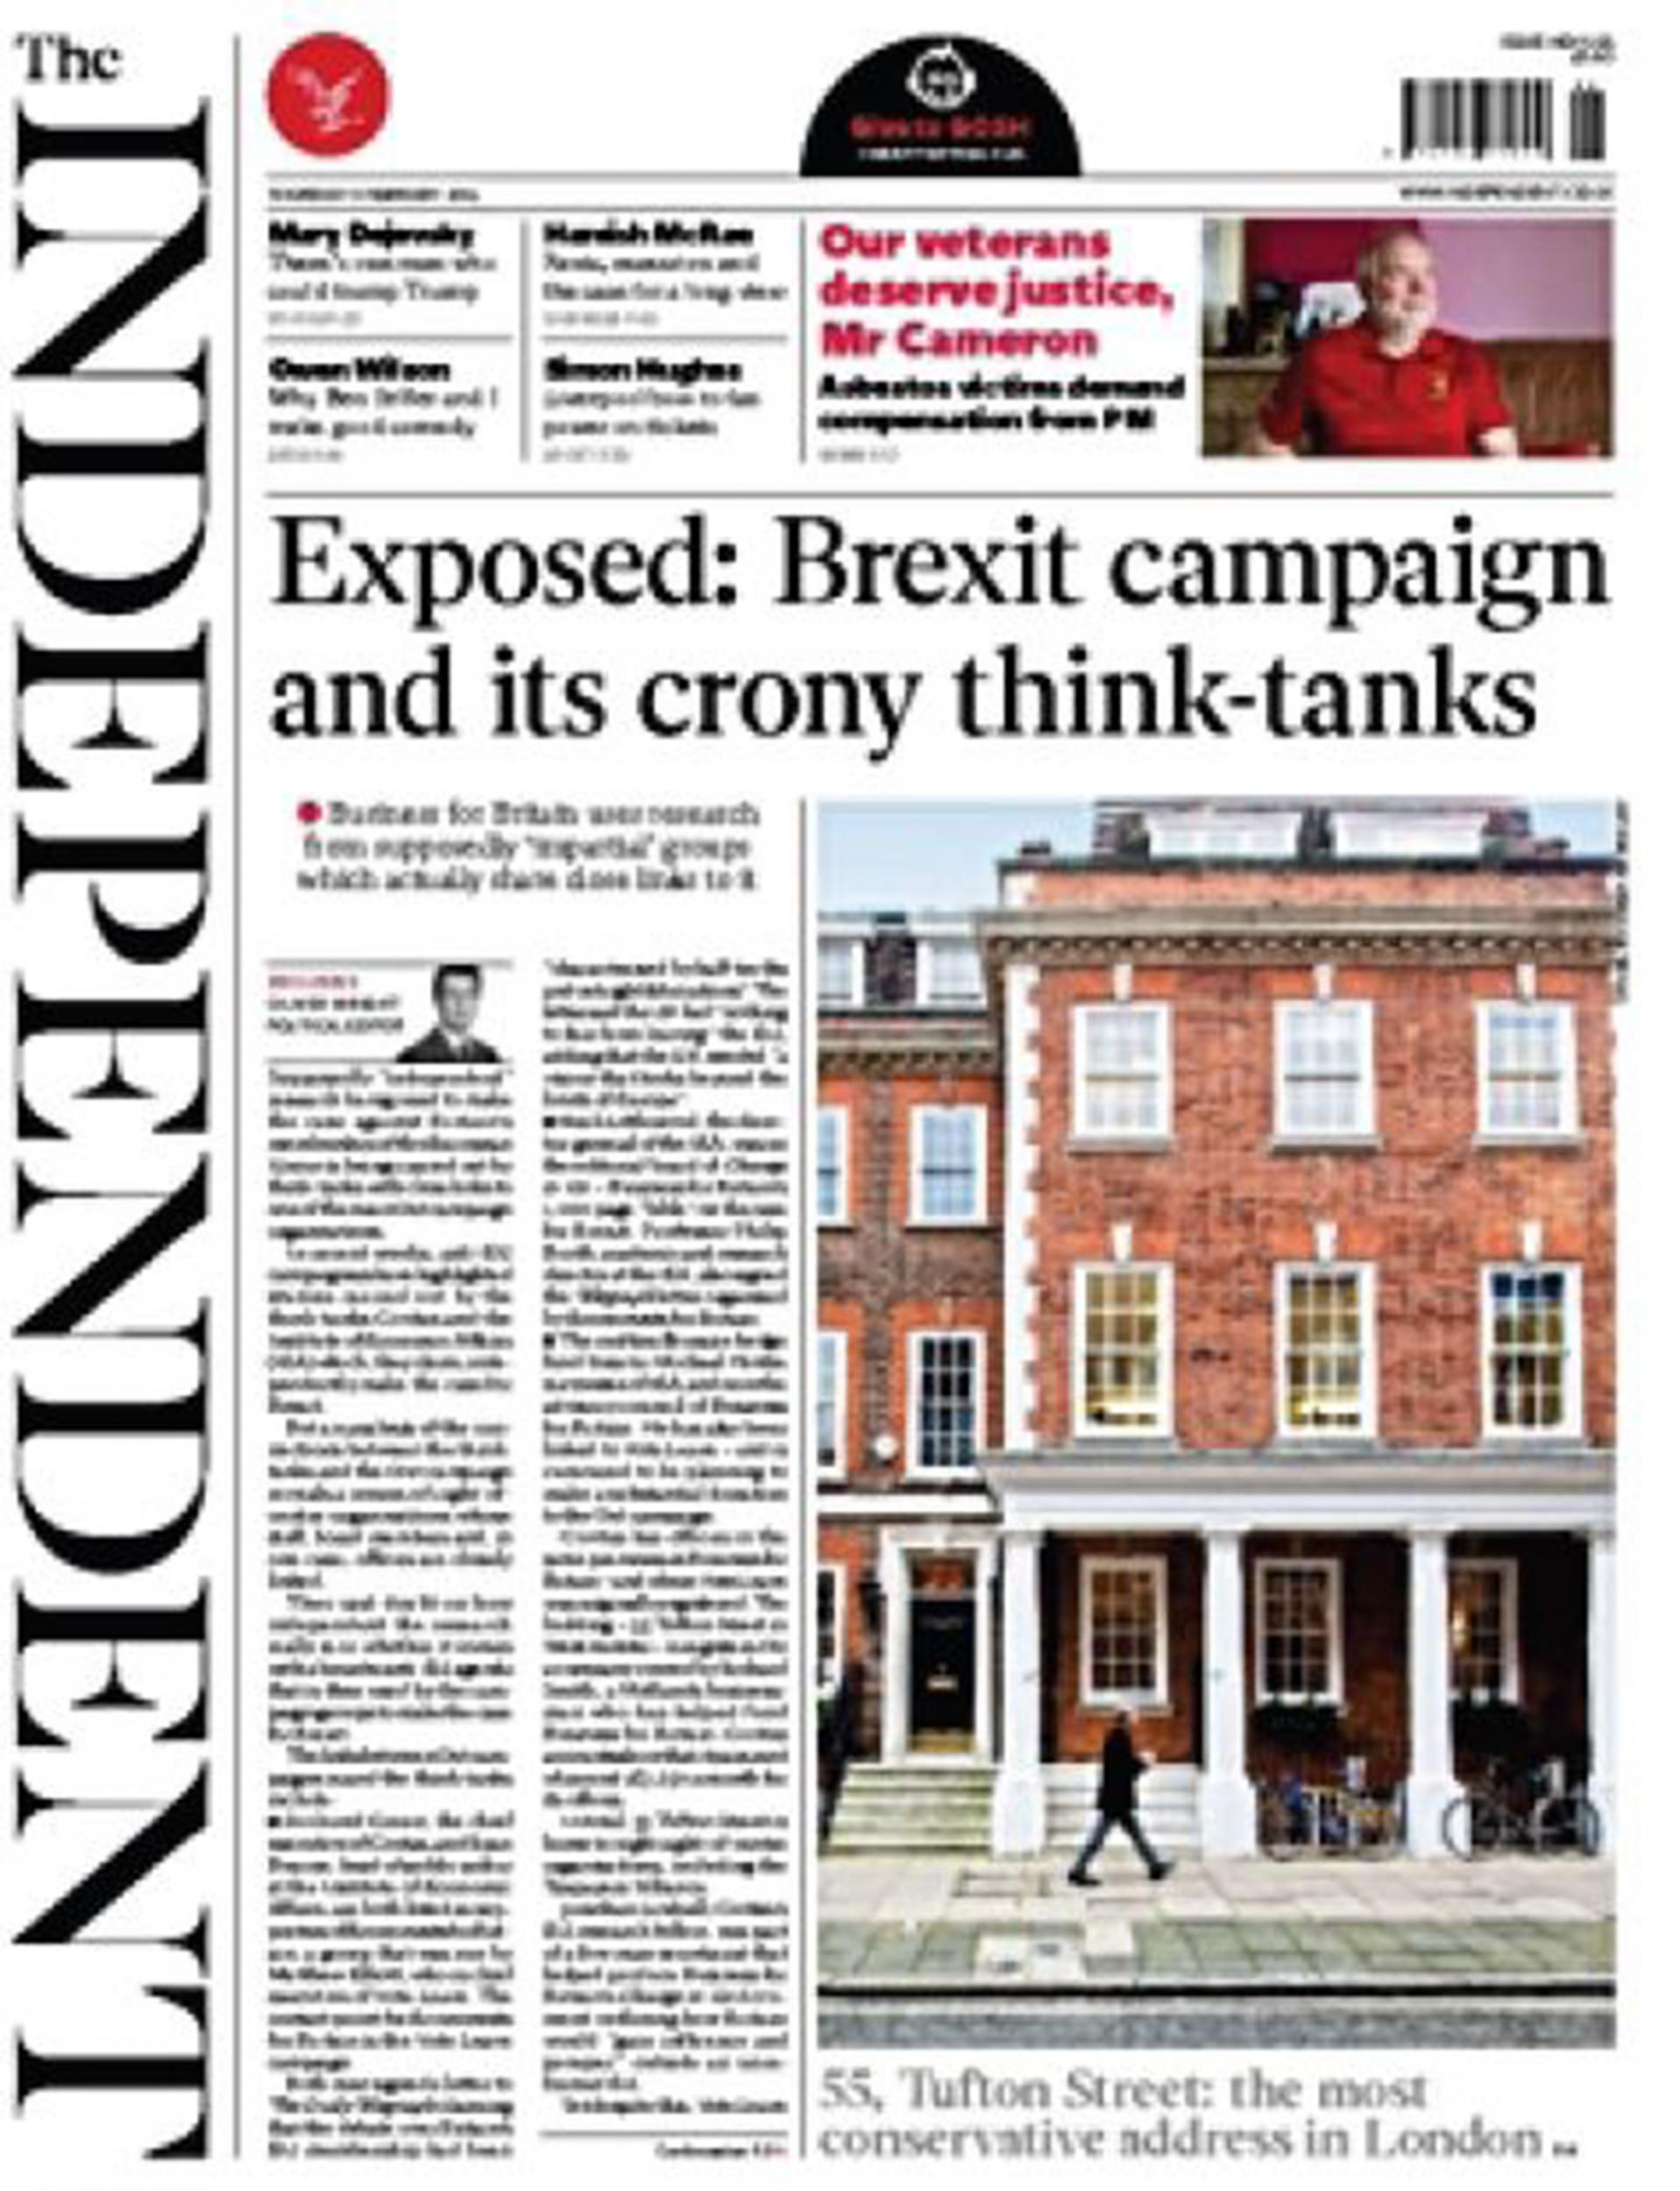 How ‘The Independent’ reported the Brexit campaign’s links with the IEA